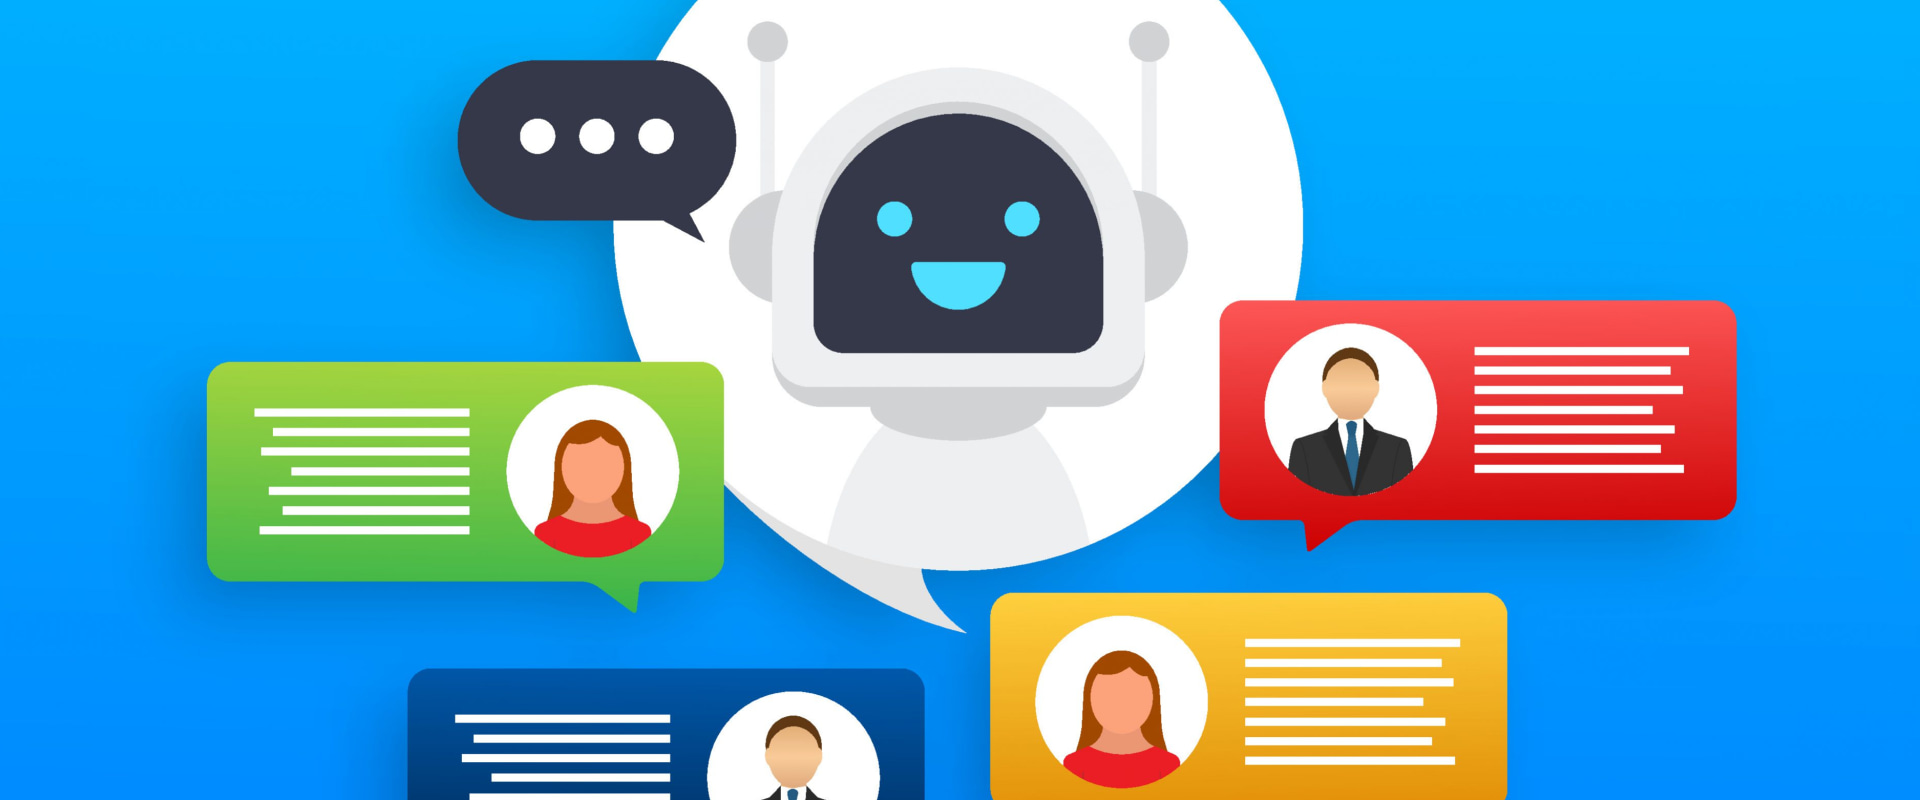 10 Ways AI-Powered Chatbots Can Help Your Business Grow